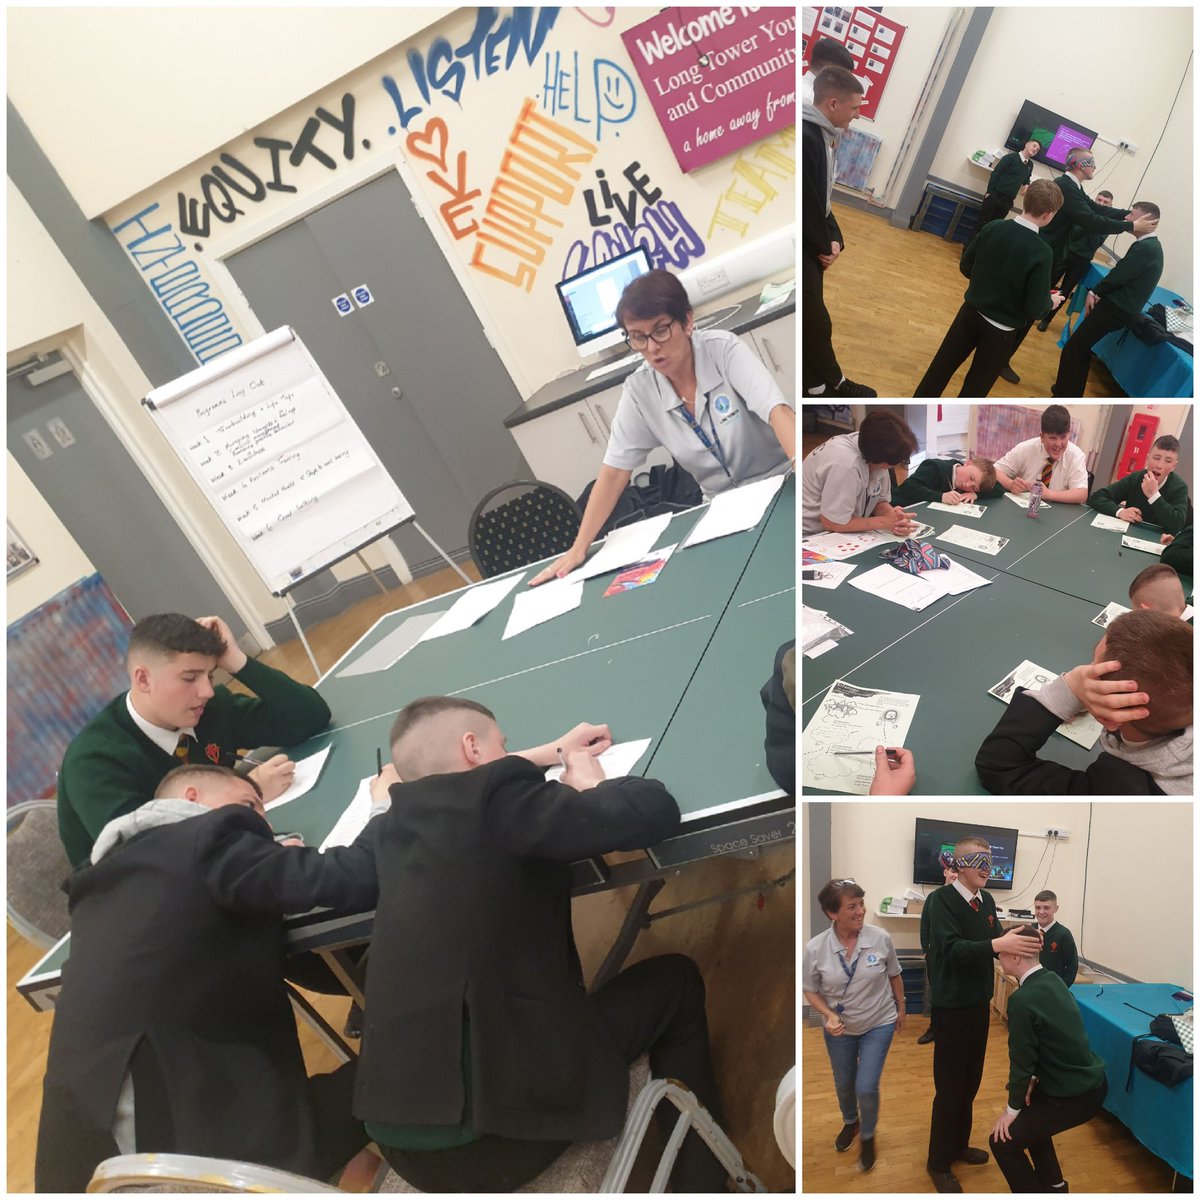 Week 1 of @StJosephsDerry resilience programme. Today we discussed the programme layout, did baselines, contract & starting their lifemaps. #youthworkworks #informaleducation @YcTower @kee_arlene @AllianceWork  @Stephen_Derry